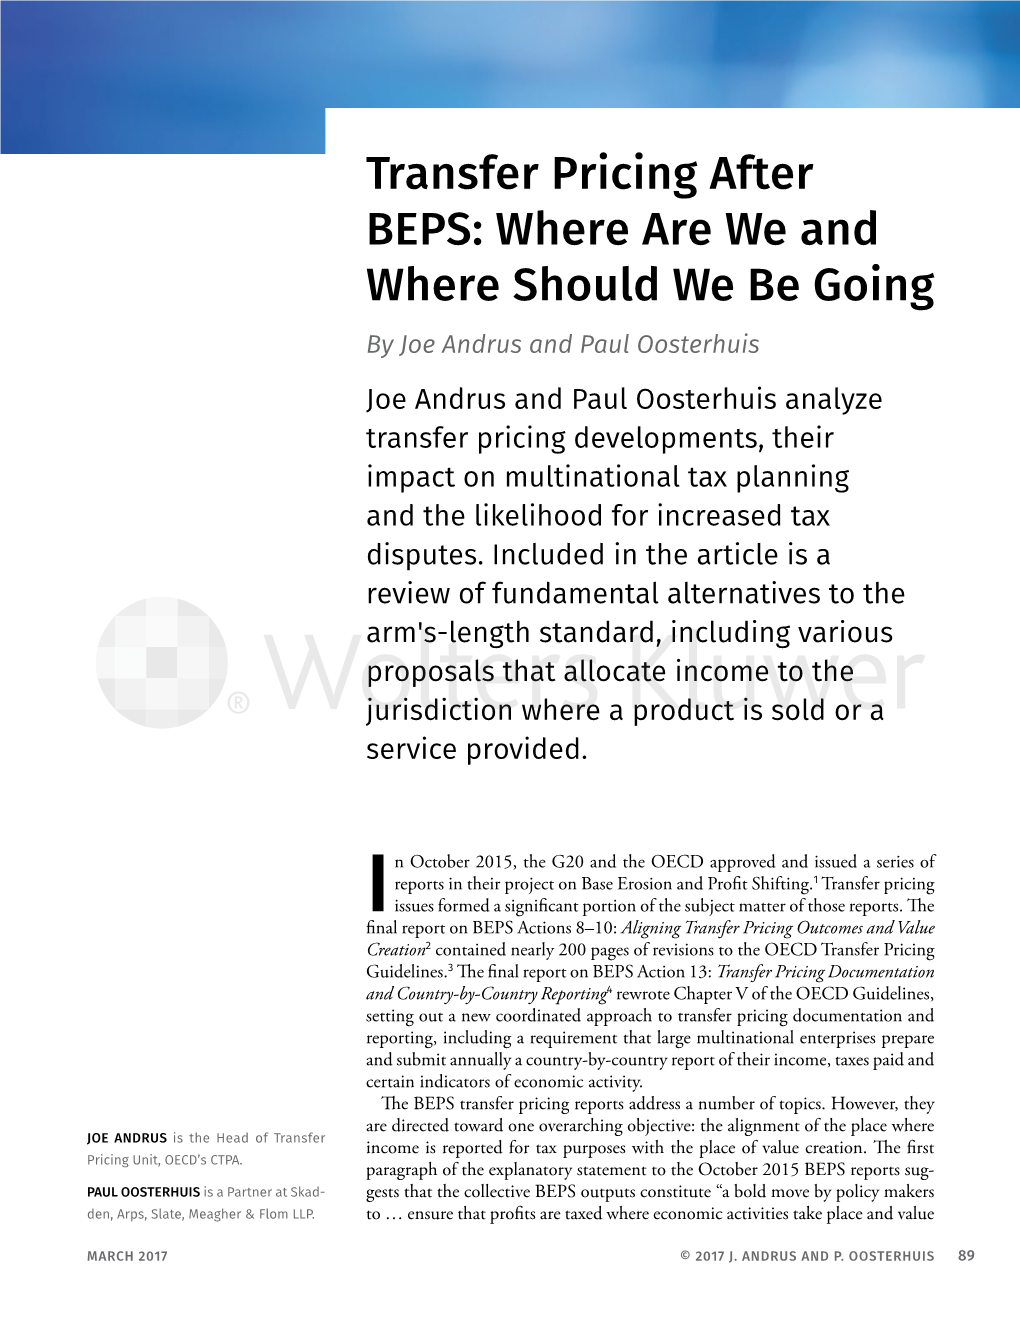 Transfer Pricing After BEPS: Where Are We and Where Should We Be